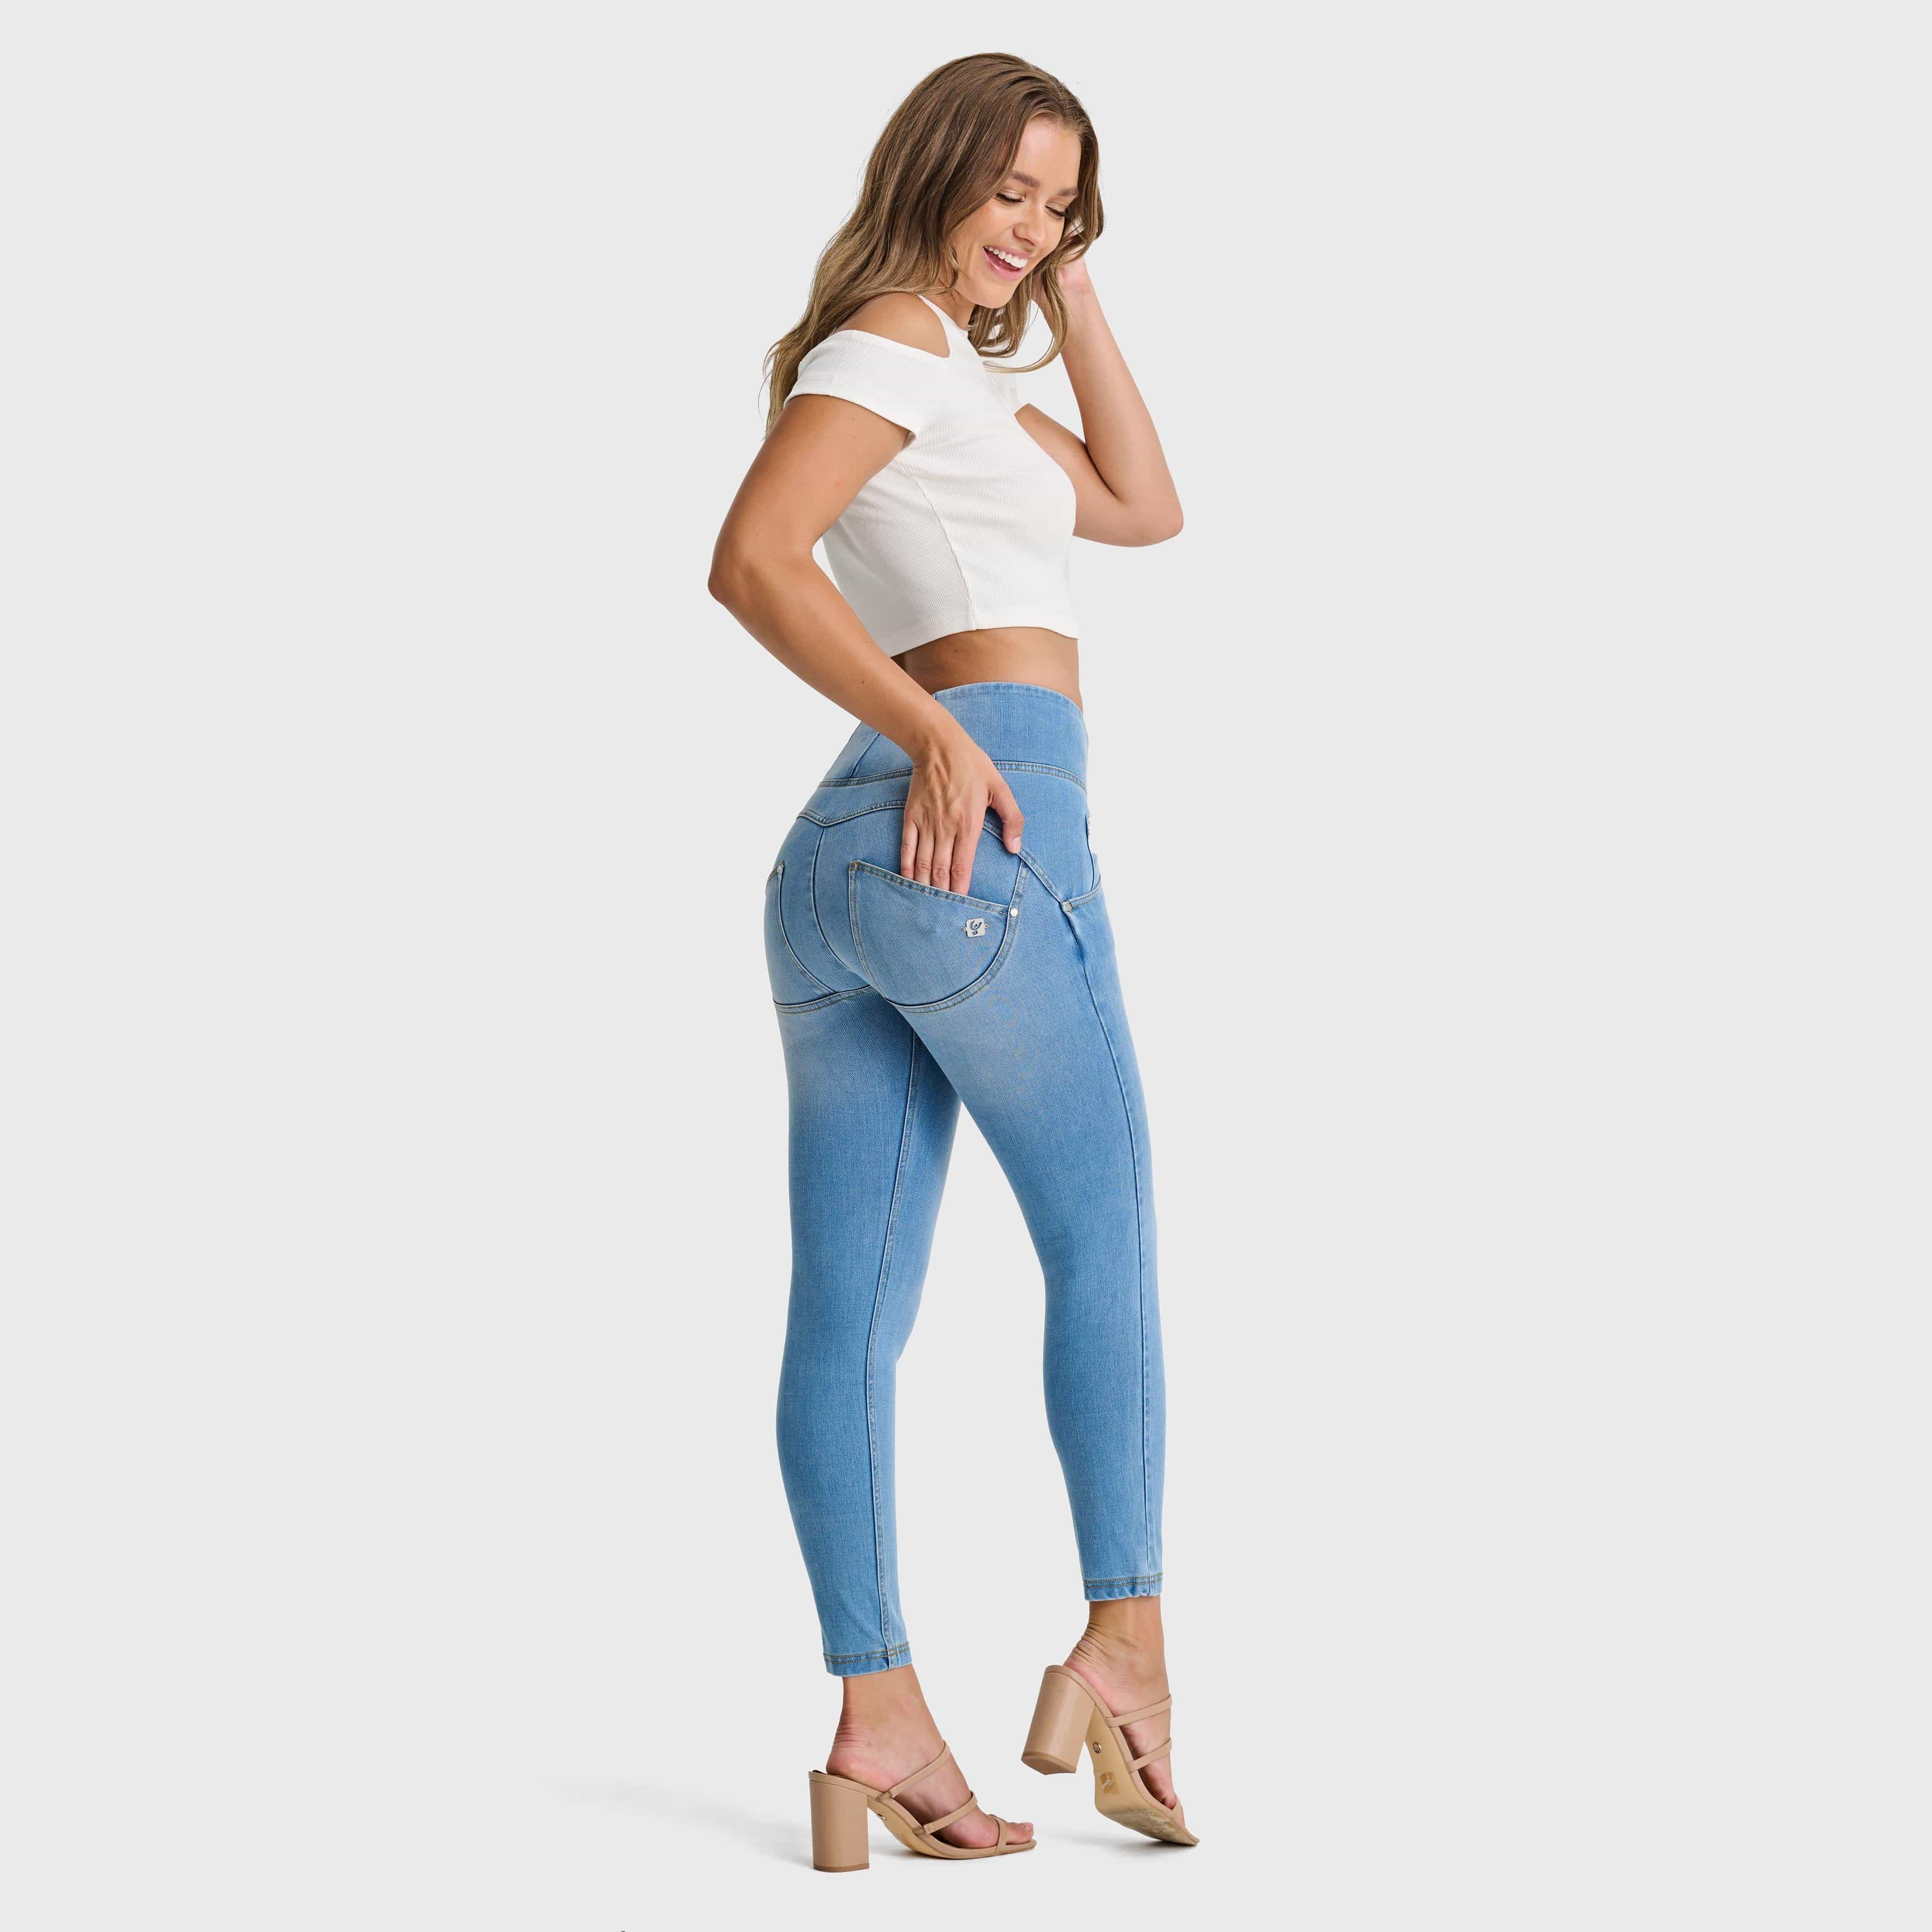 WR.UP® Snug Jeans - High Waisted - 7/8 Length - Light Blue + Yellow Stitching 3